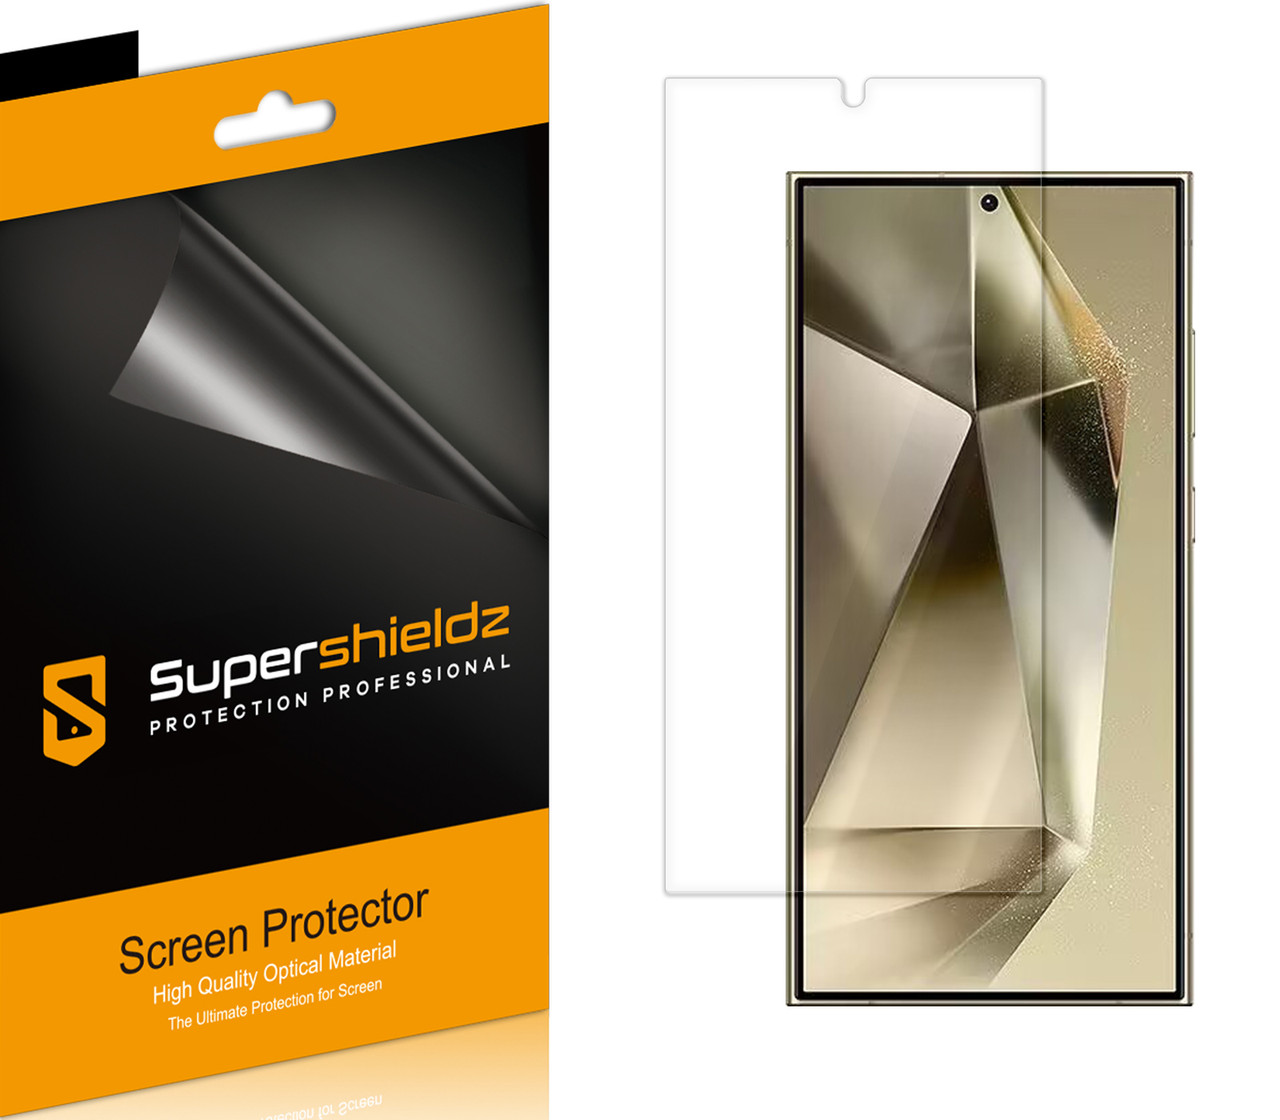 S24 Ultra new anti reflective screen with a screen protector :  r/GalaxyS24Ultra